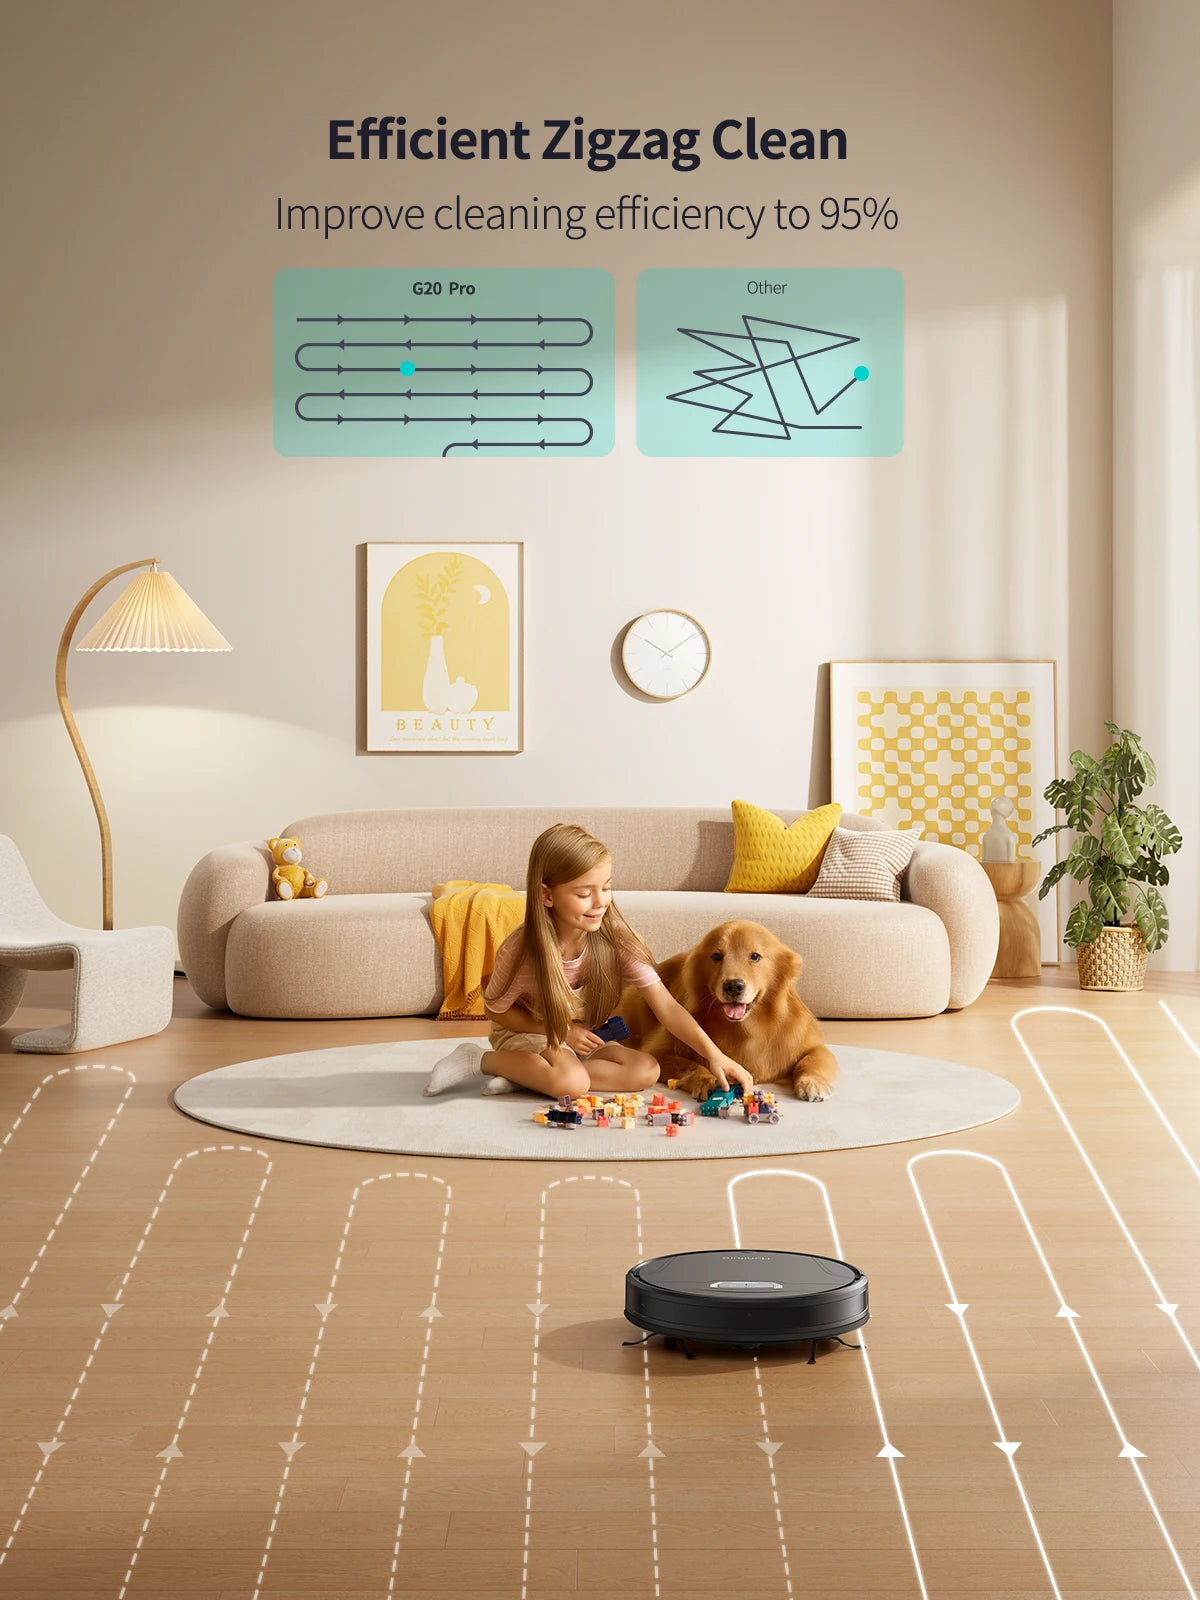 Honiture Robot Vacuum Cleaner G20pro 4500pa 3 in 1 Sweeping and Mop Robot Strong Suction Self-Charging Smart Barrier Robot